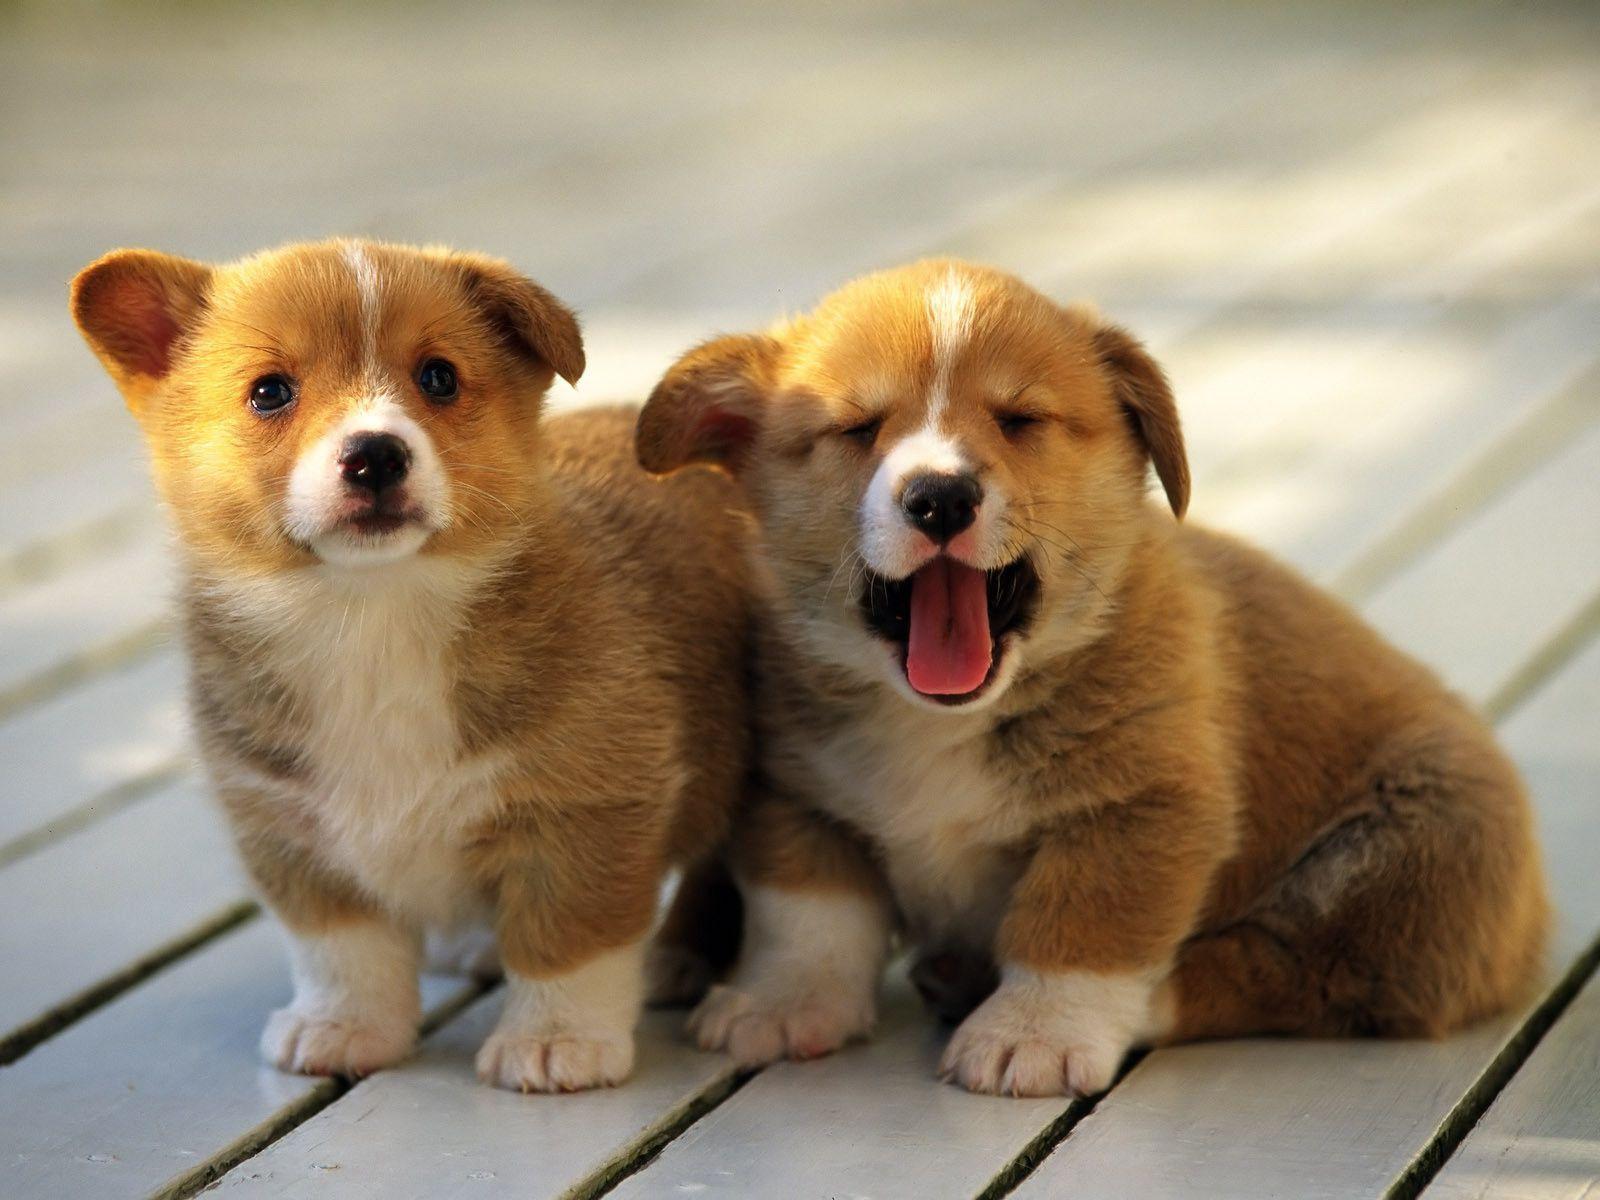 Free Download Cute Puppy Wallpaper in 1600x1200 resolutions